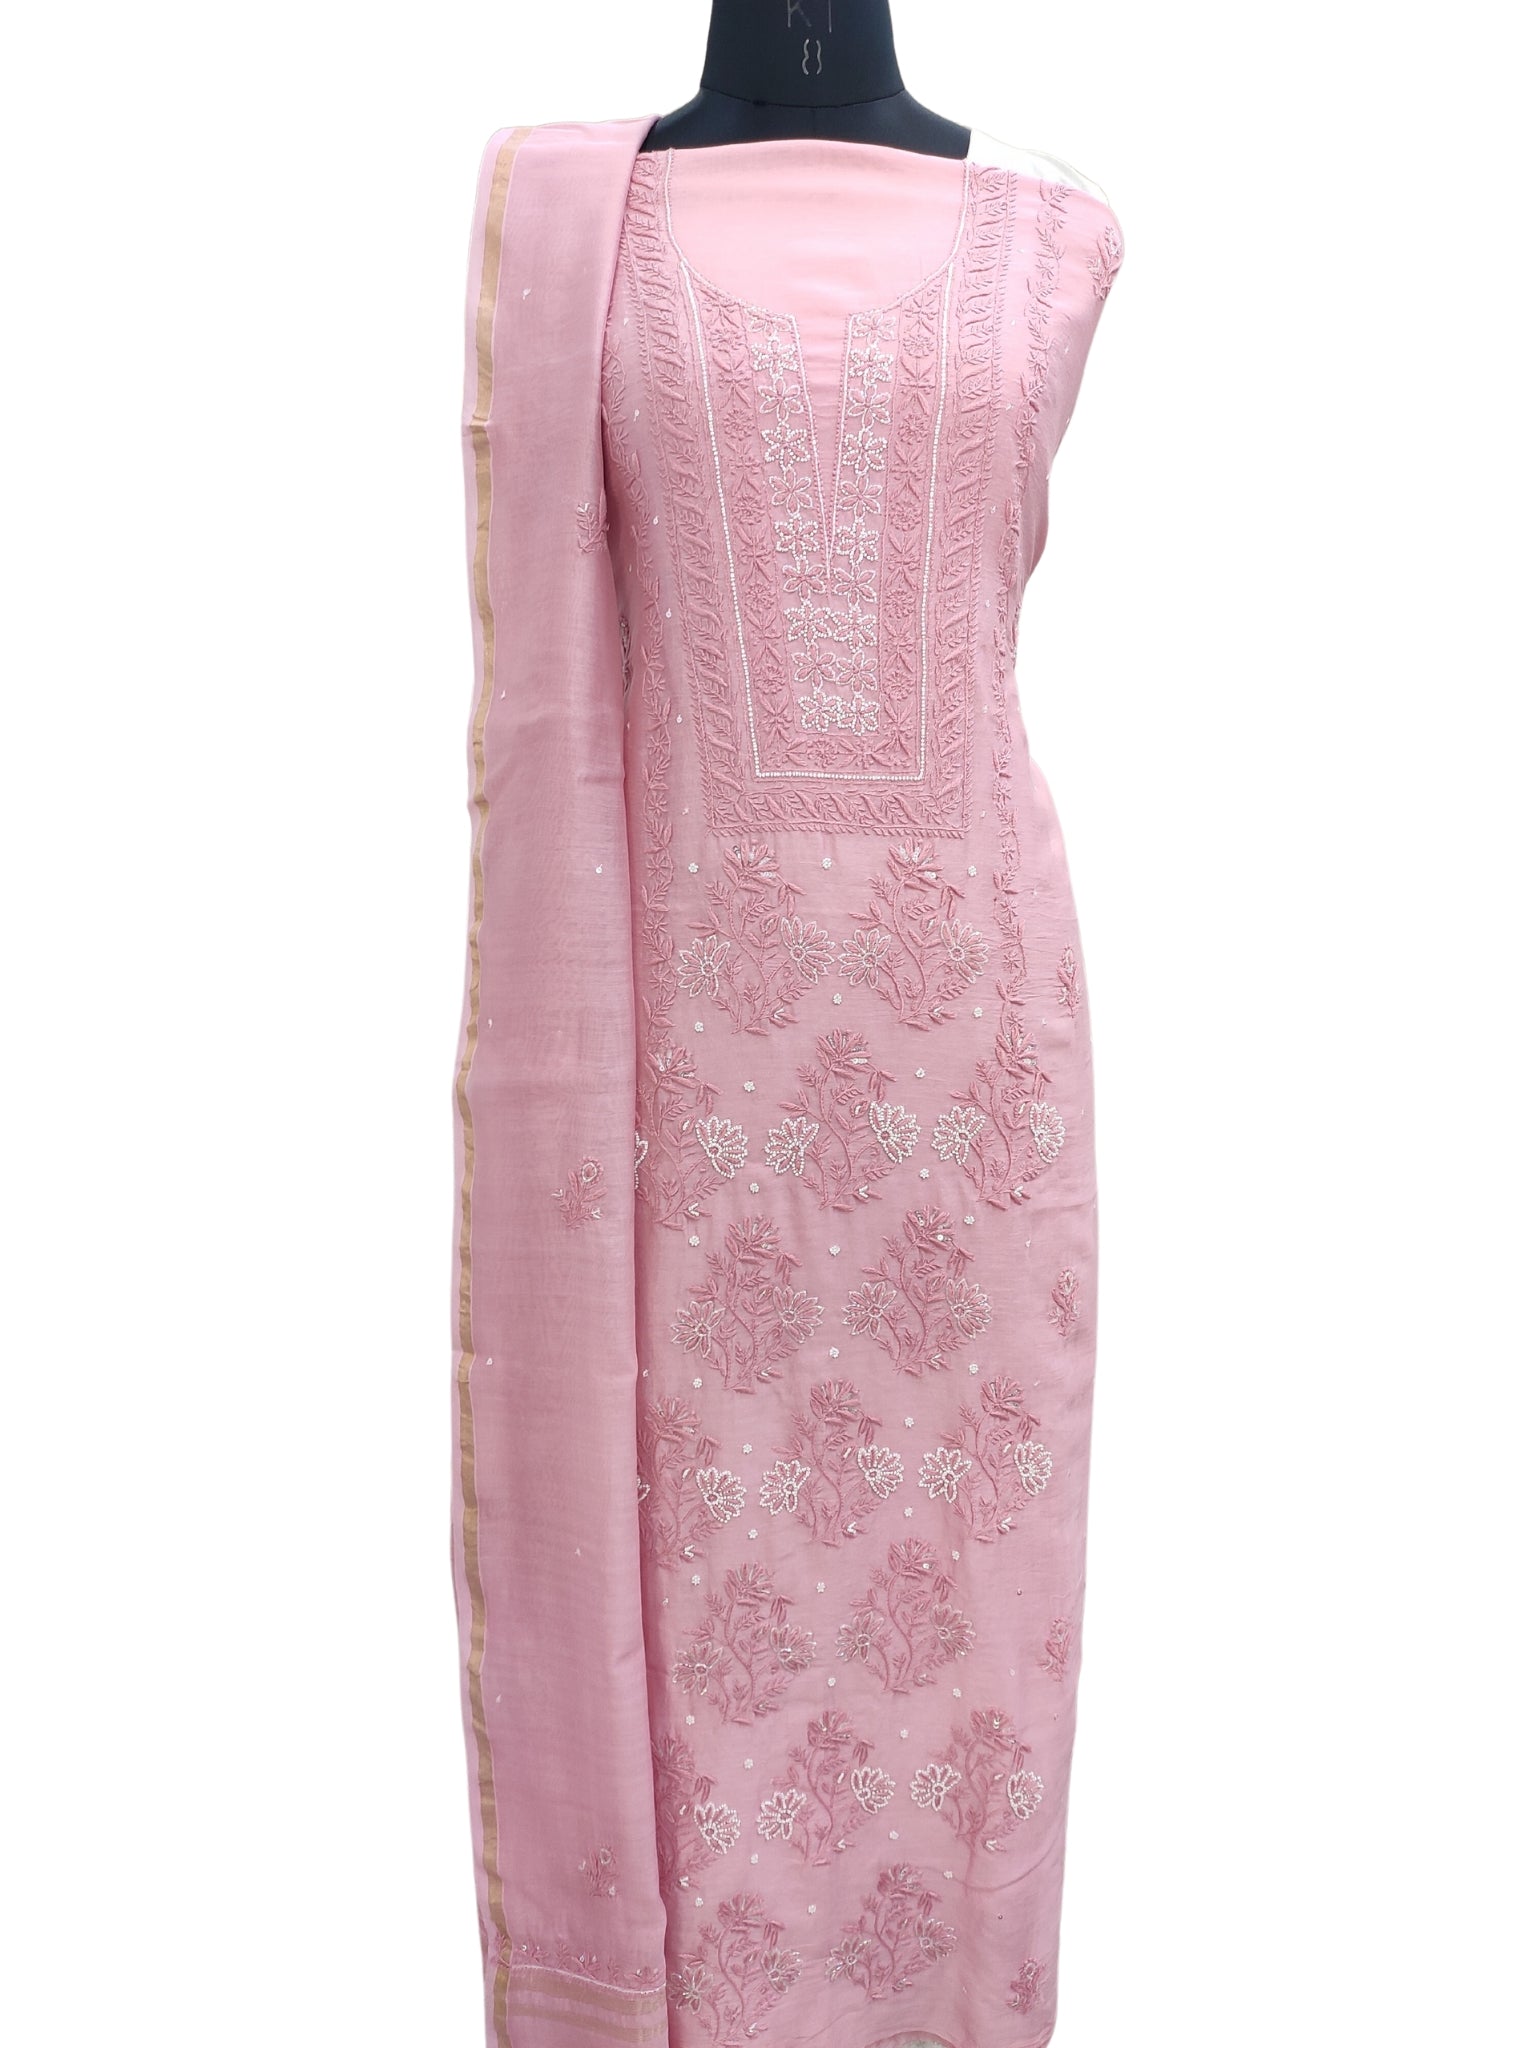 Shyamal Chikan Hand Embroidered Pink Chanderi Lucknowi Chikankari Unstitched Suit Piece with Pearl & Sequin Work (Set of 2) - S20075